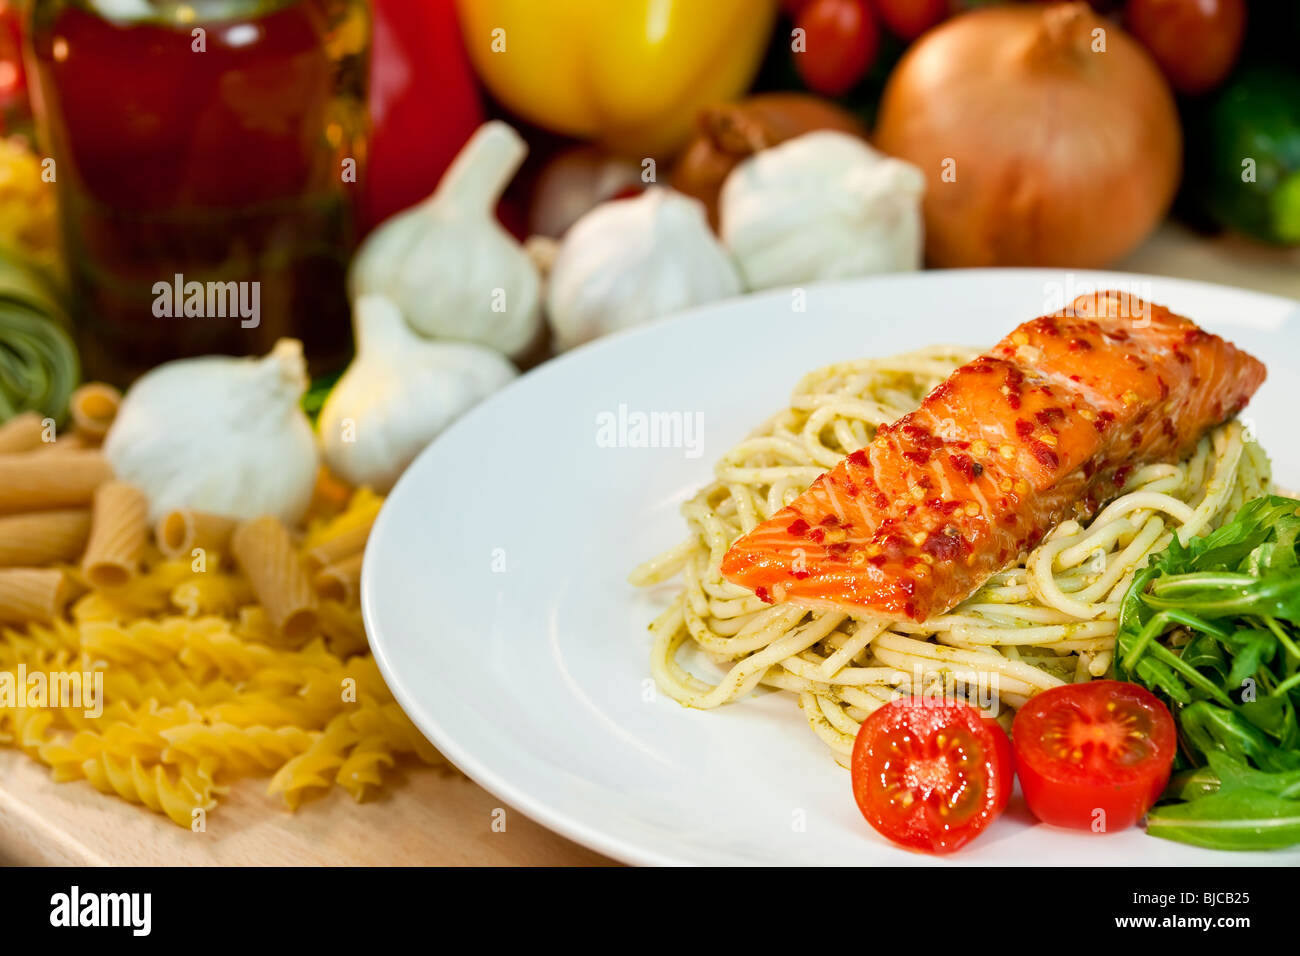 Seared chili salmon fillet with pesto spaghetti, rocket salad and cherry tomatoes with other ingredients in the background Stock Photo